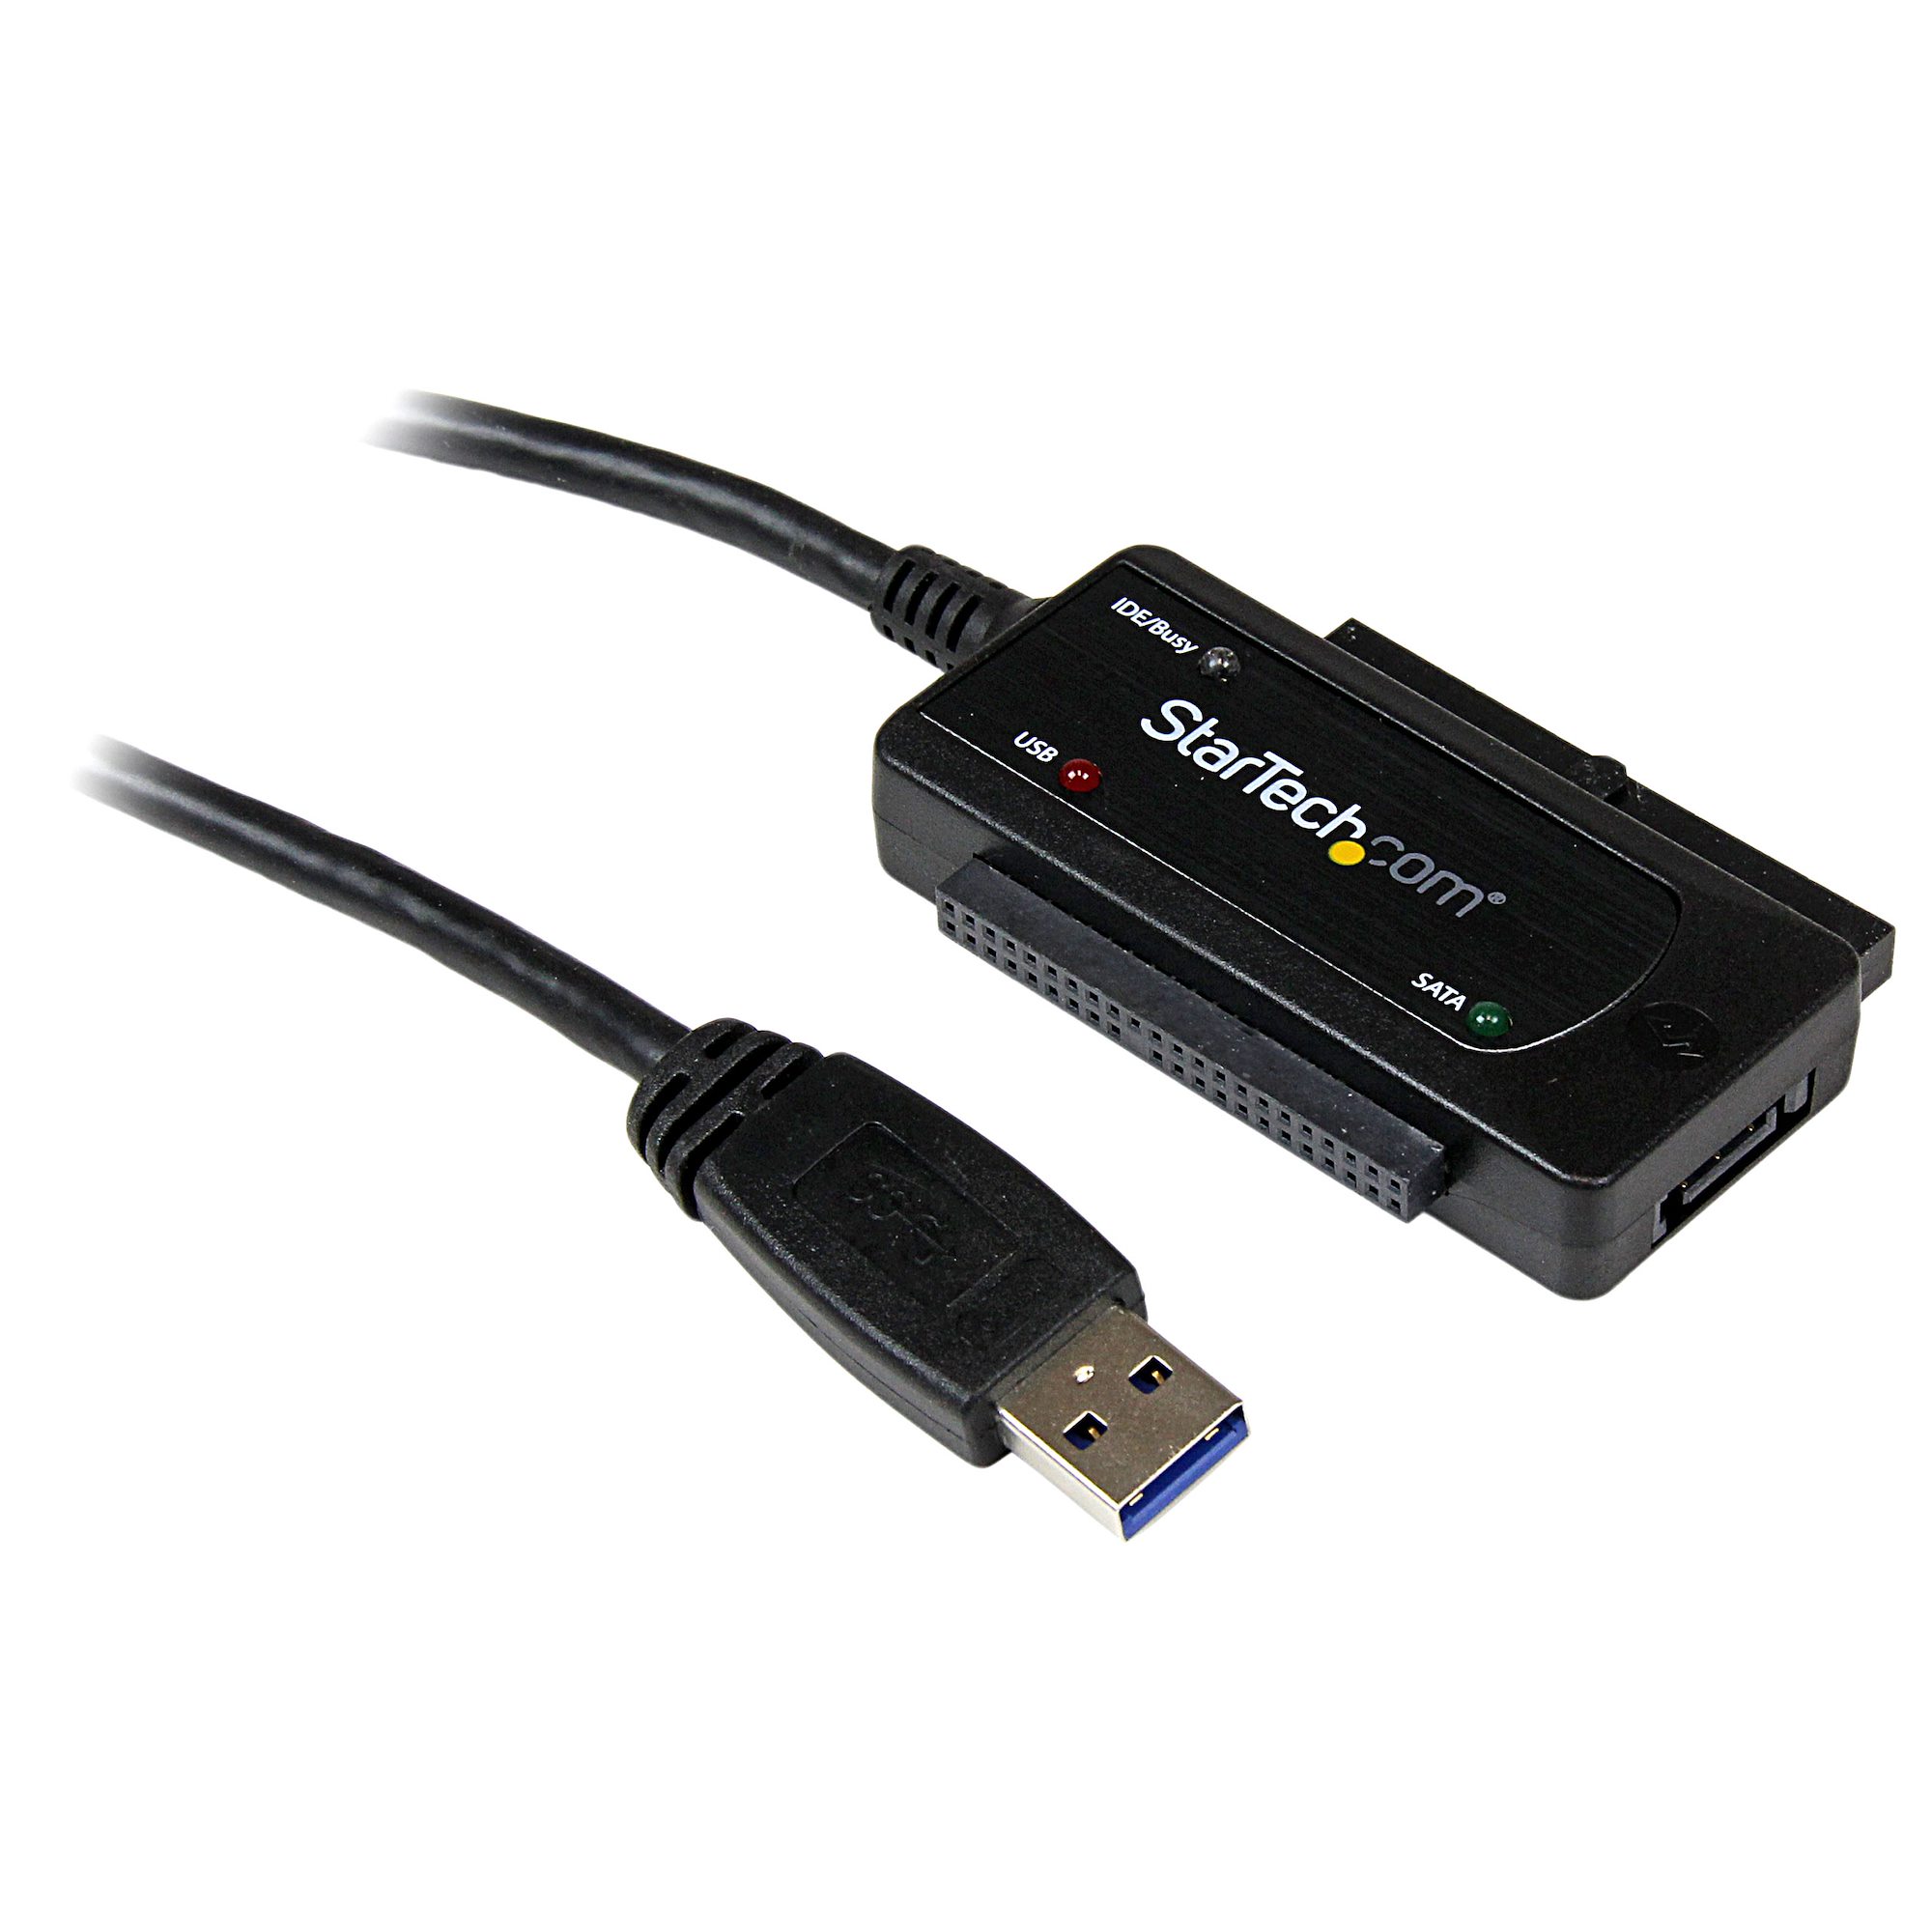 Componist Kwelling vastleggen USB 3.0 to SATA / IDE Hard Drive Adapter - Drive Adapters and Drive  Converters | StarTech.com